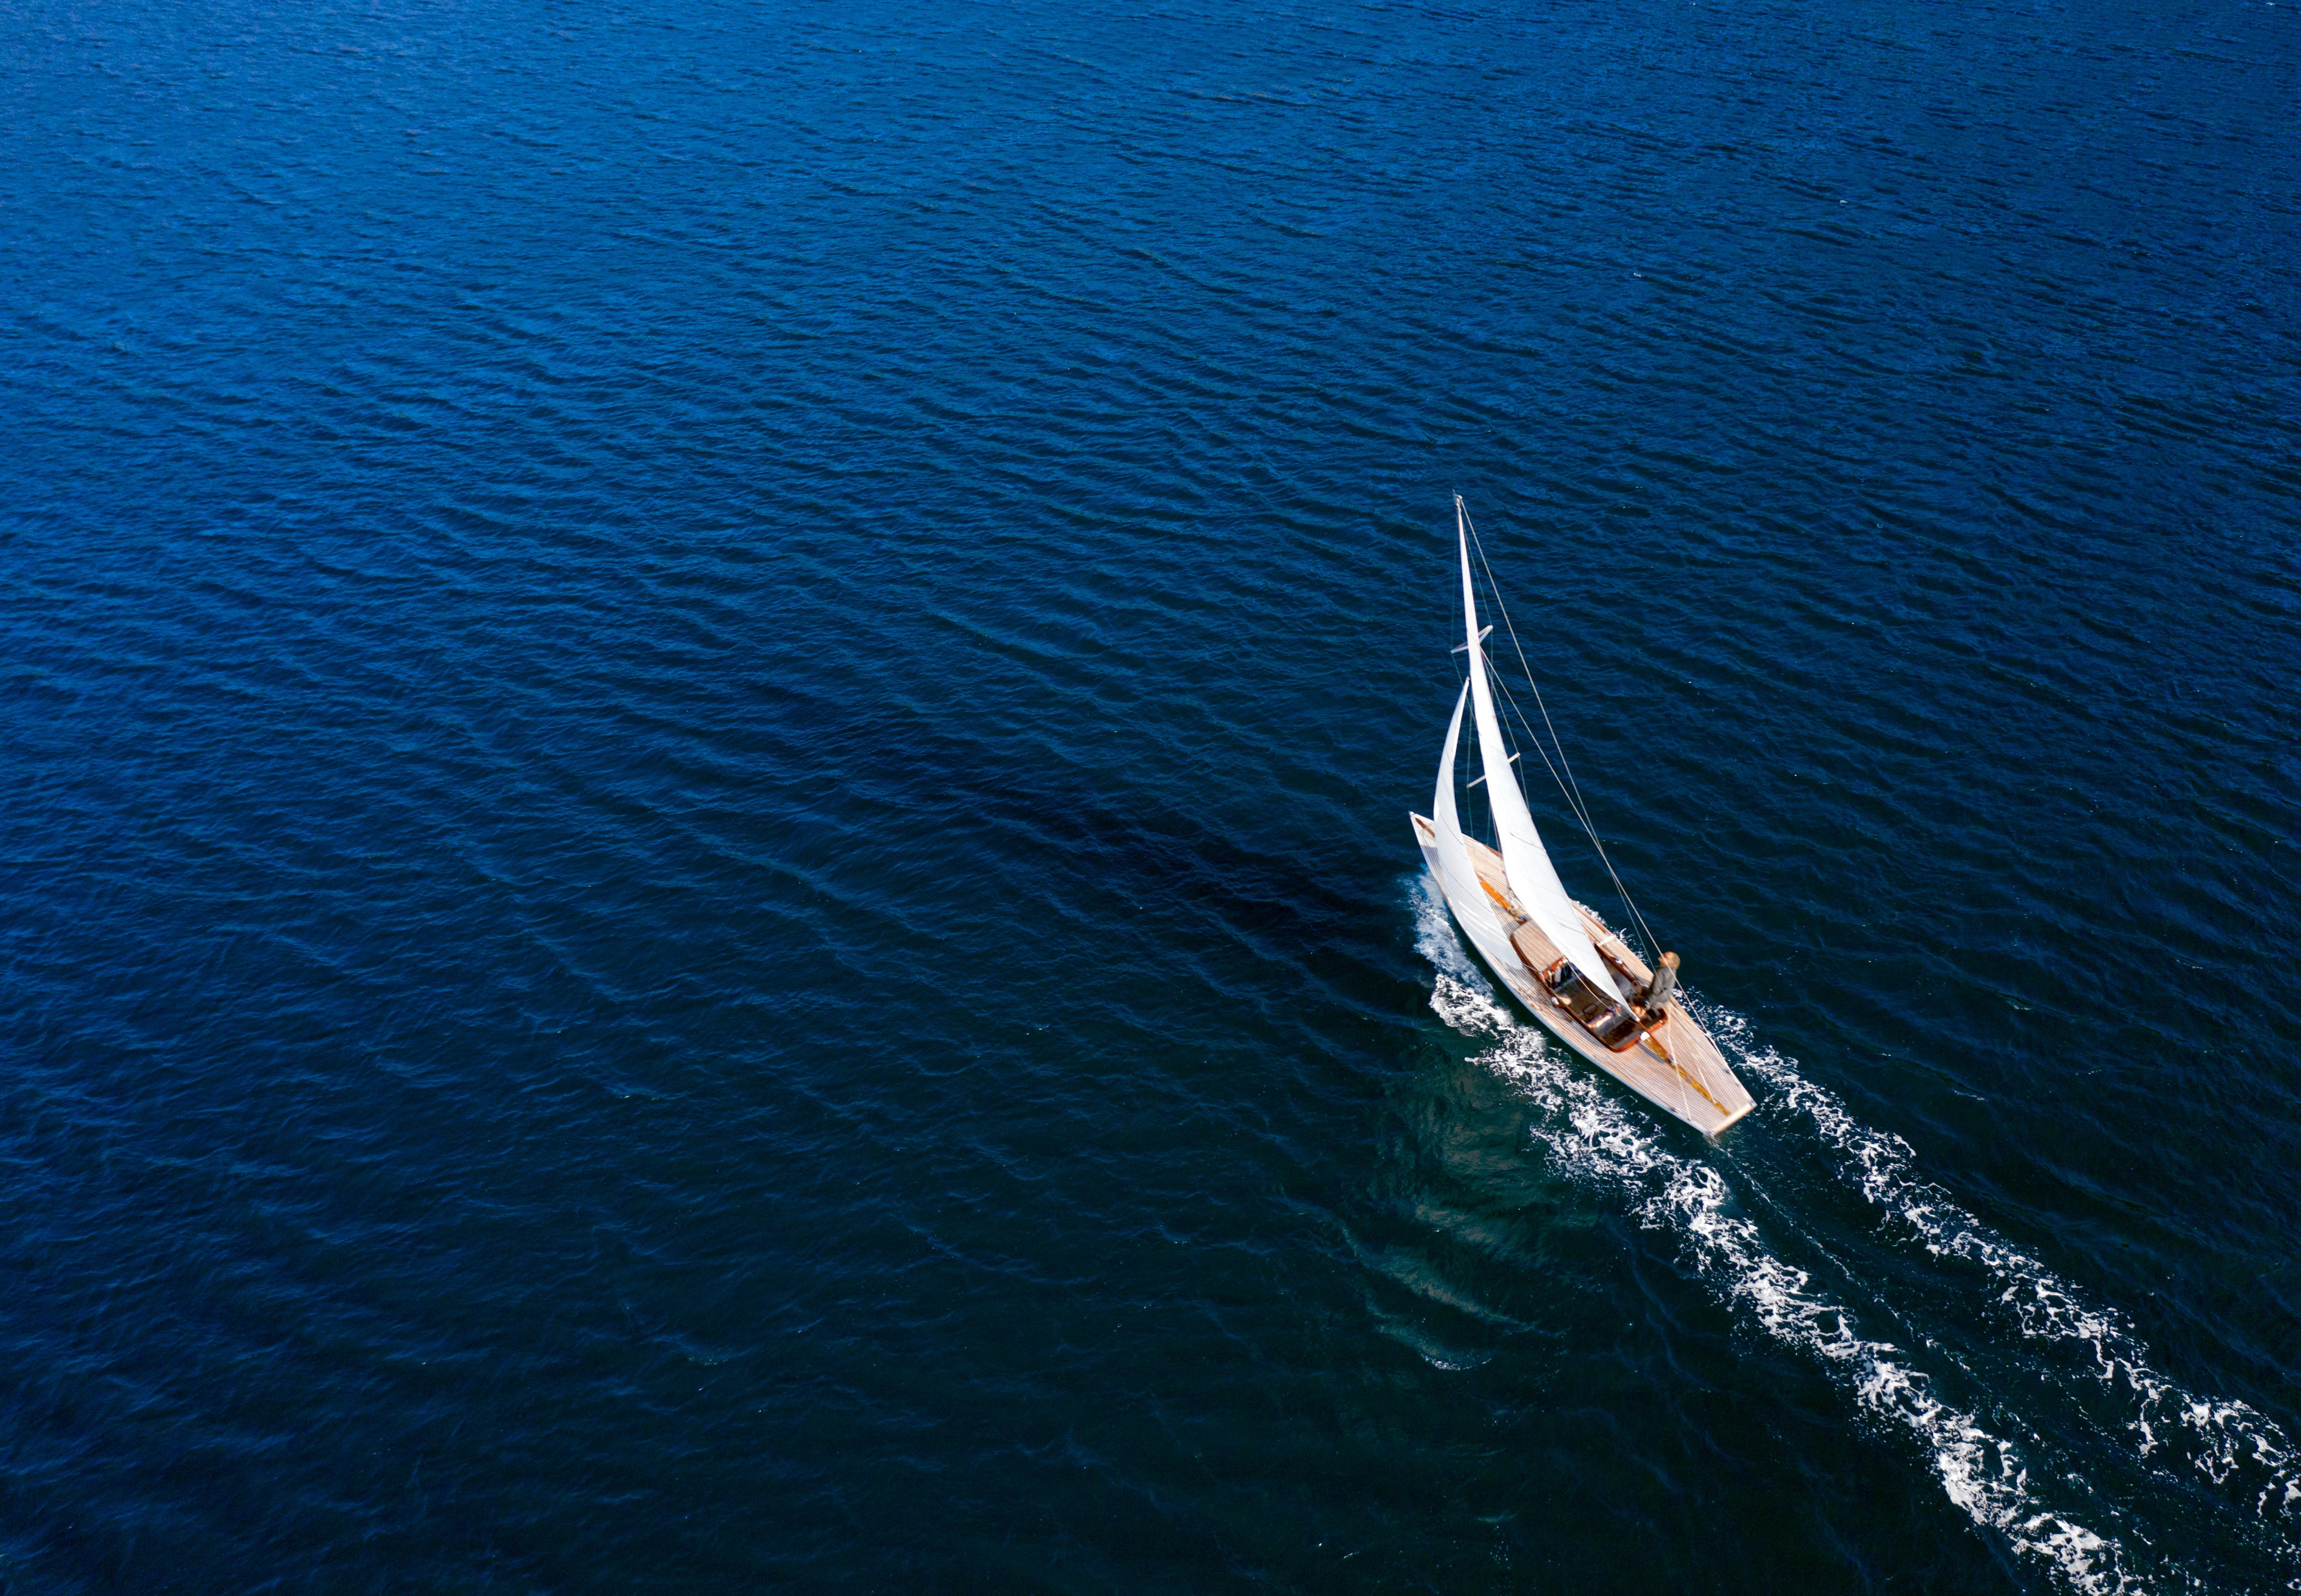 An aerial view of a small sail boat in a big patch of blue ocean. A man is visible sailing the boat.